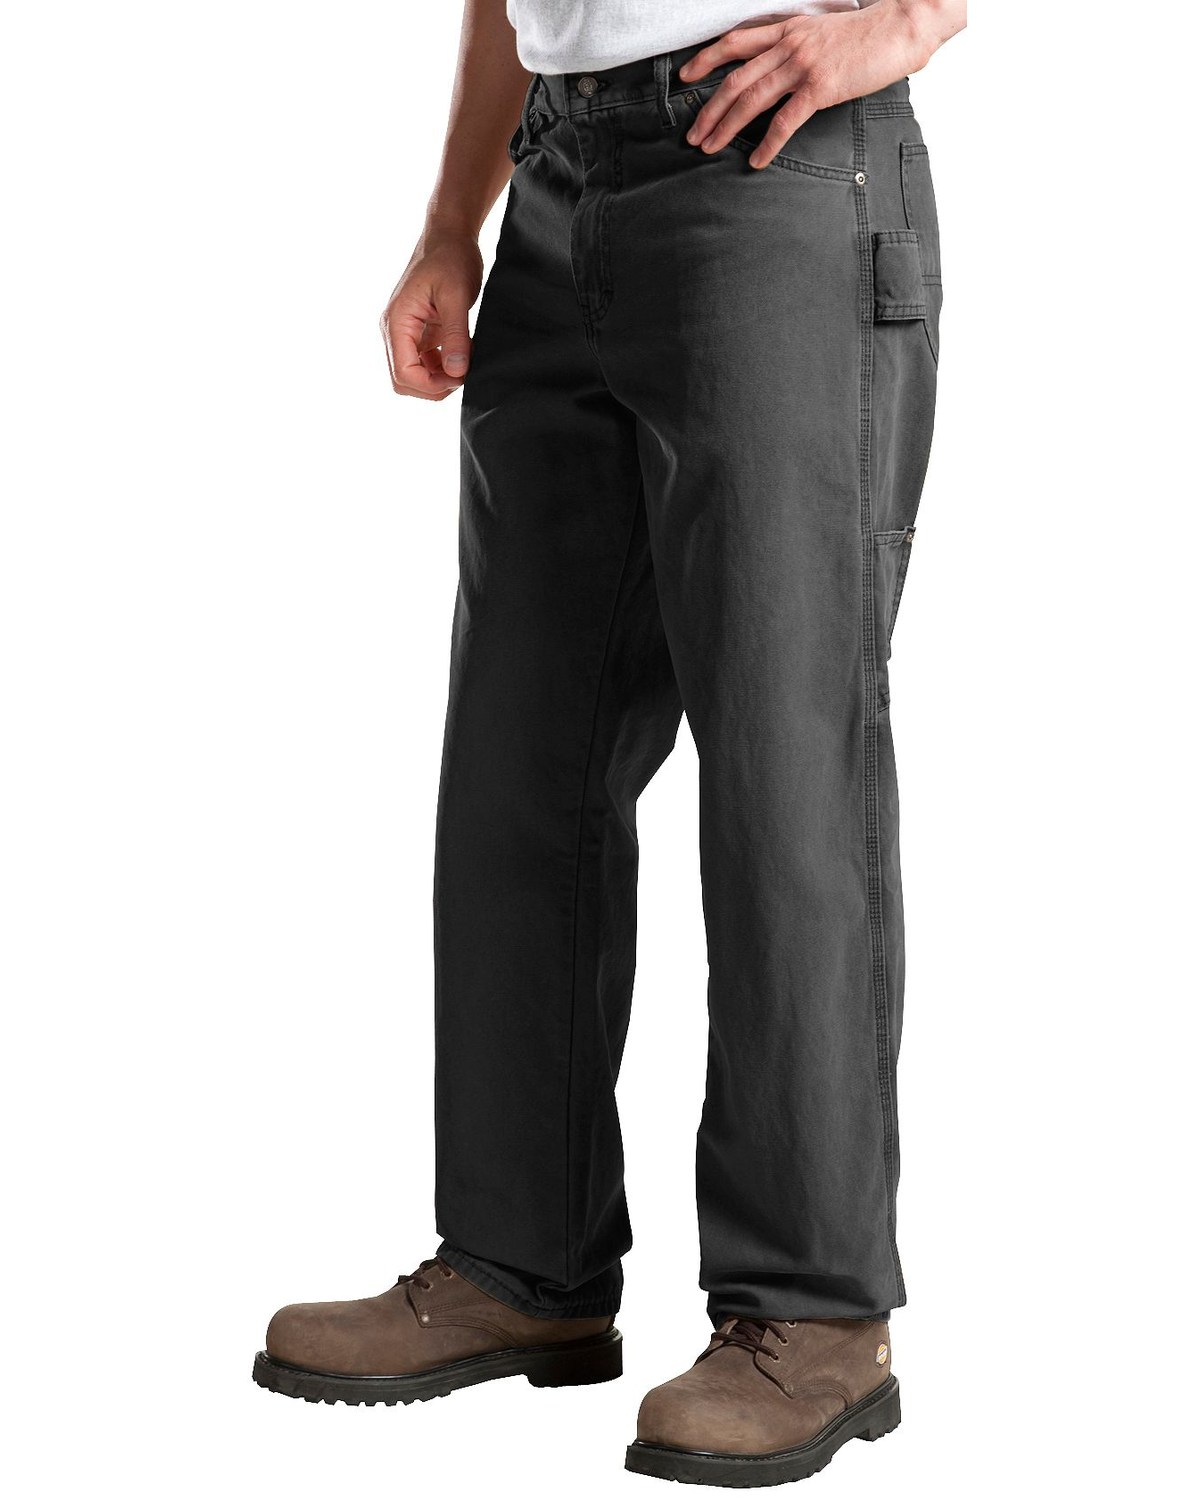 Dickies Men's Relaxed Fit Sanded Duck Carpenter Jeans